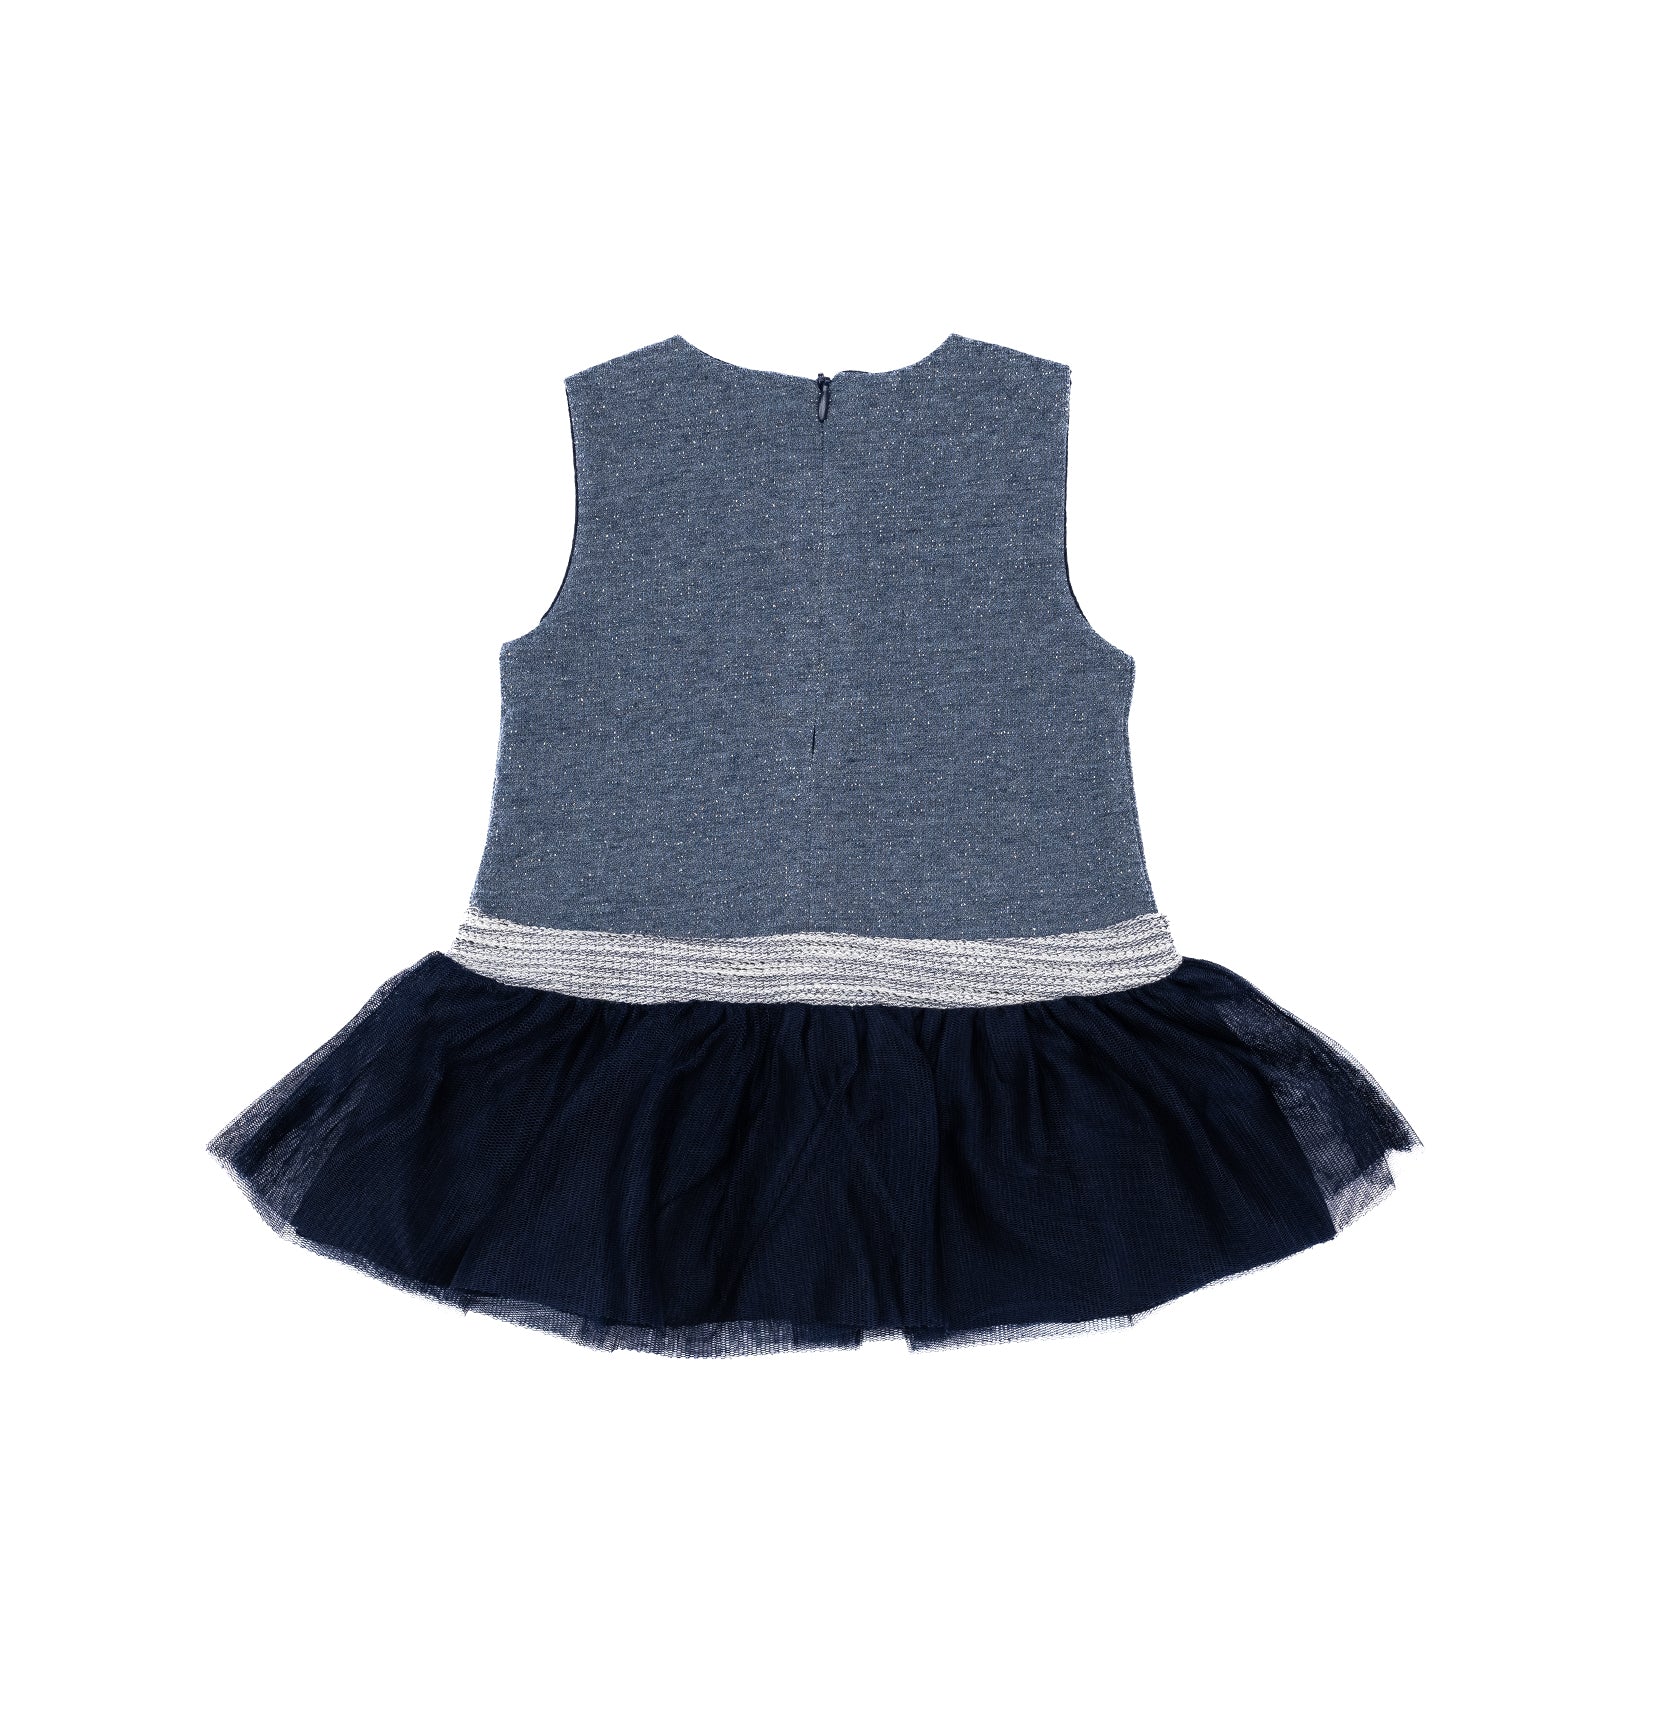 Cute short baby girl dress by Pompelo